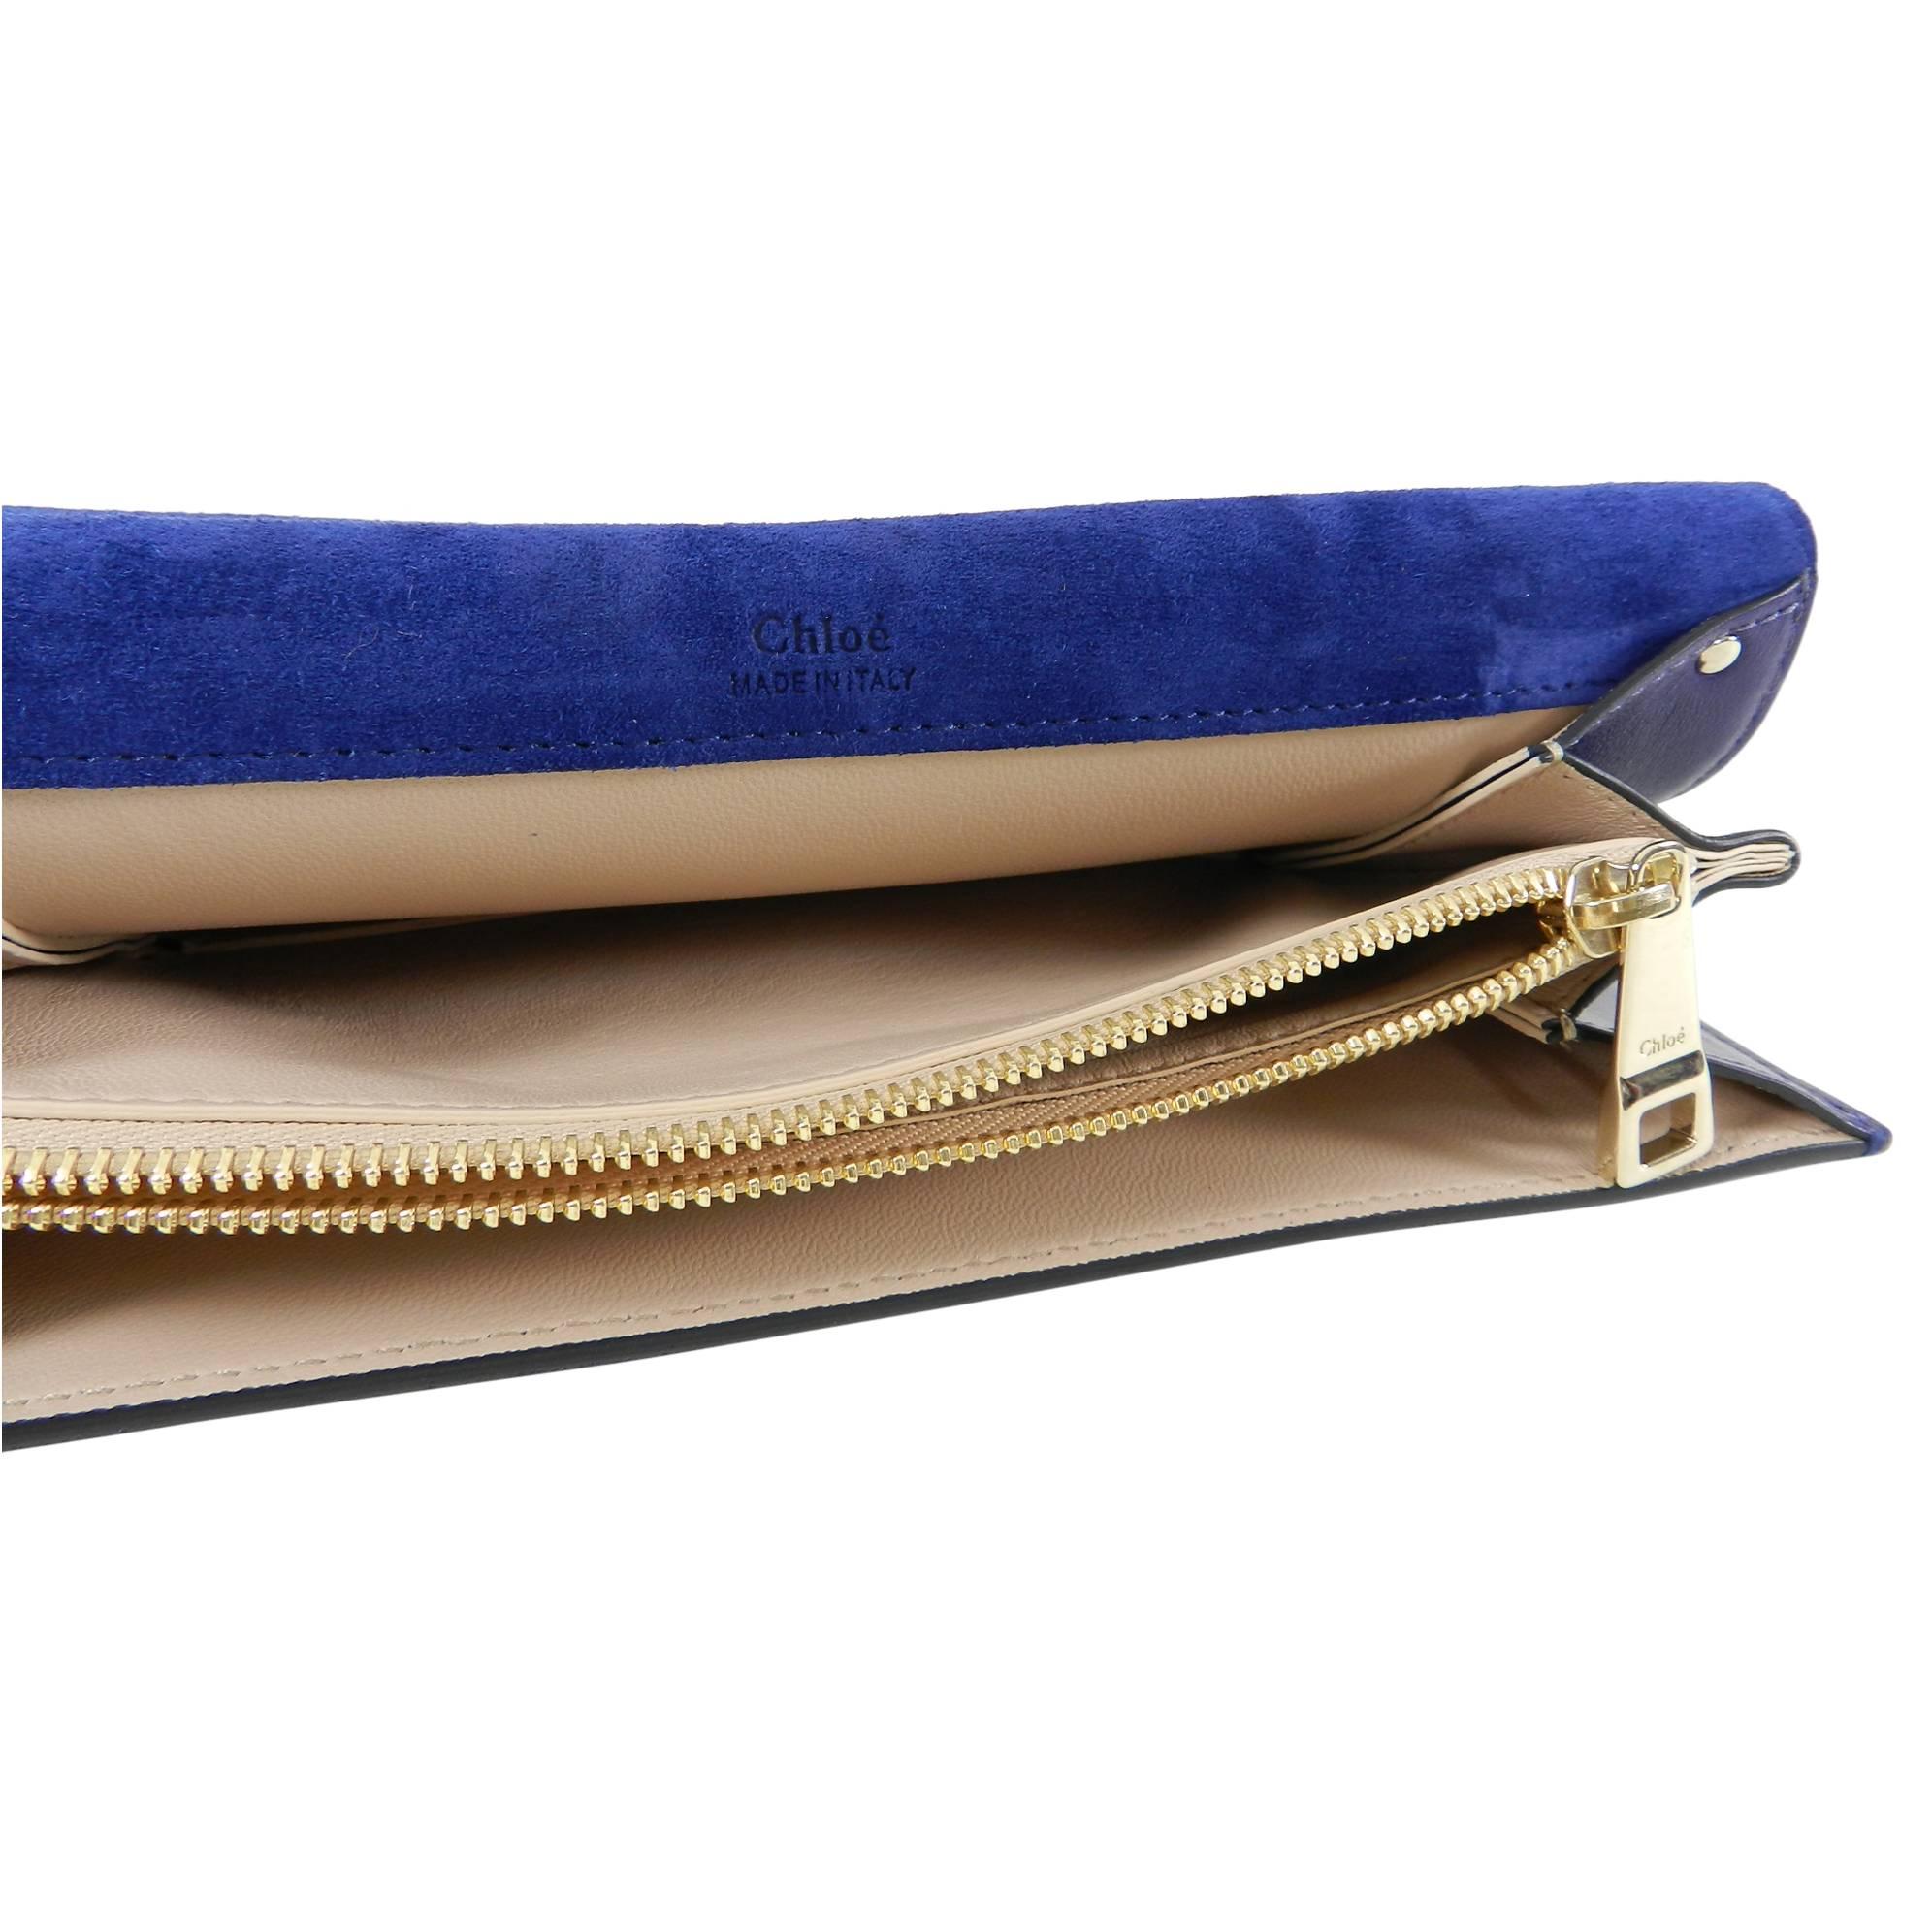 Chloe Navy Gabrielle Clutch Navy Leather and Suede 2